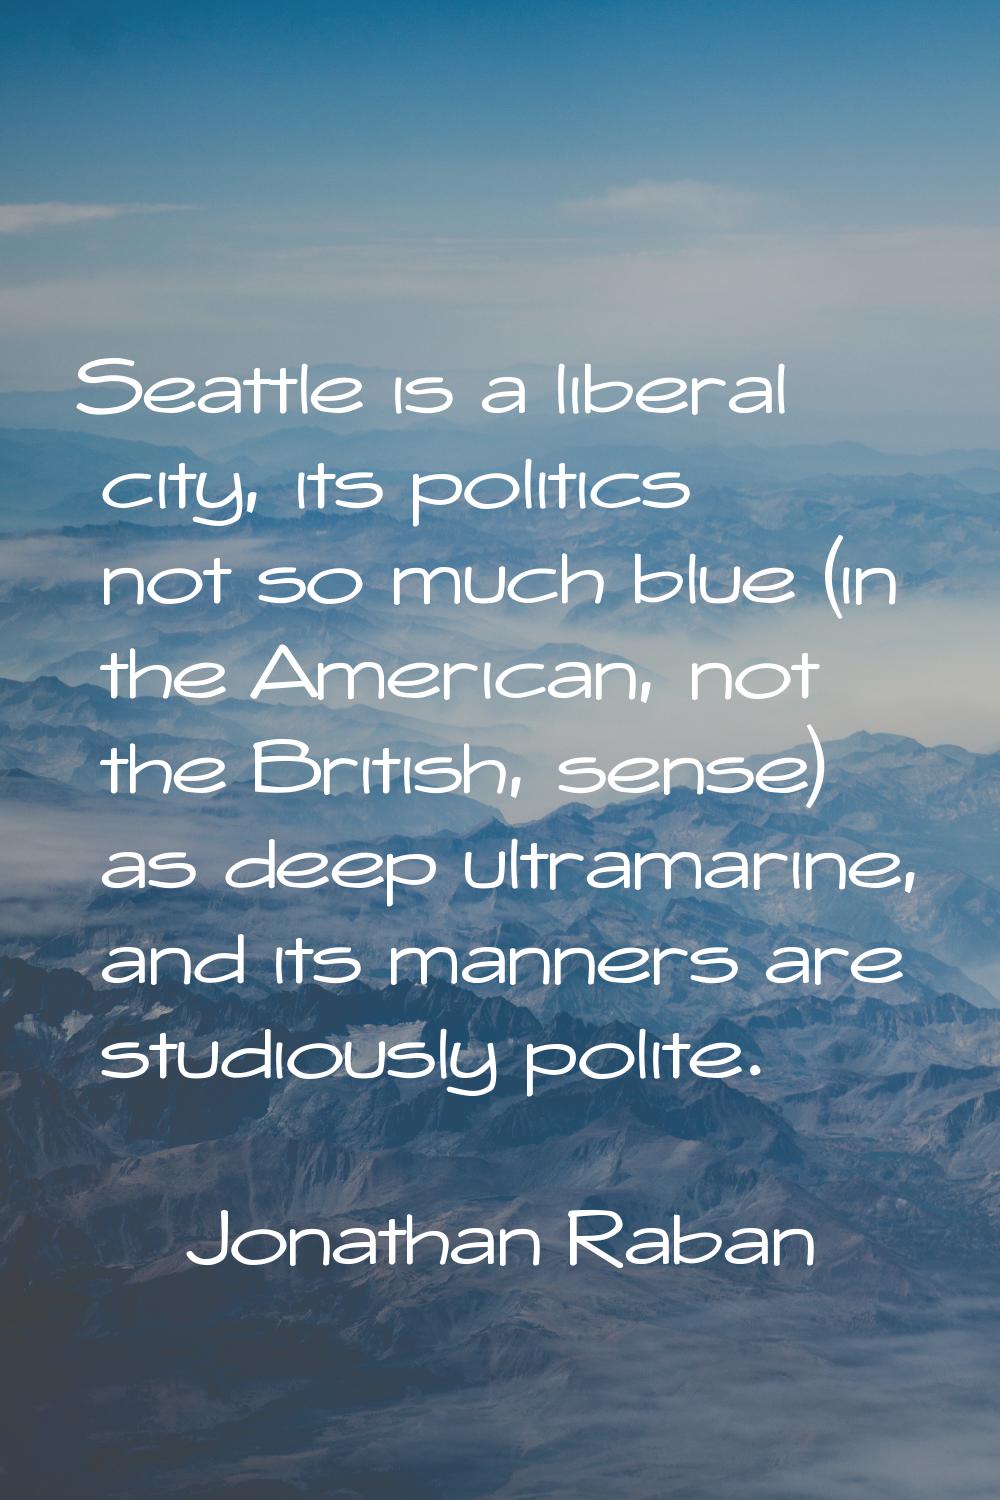 Seattle is a liberal city, its politics not so much blue (in the American, not the British, sense) 